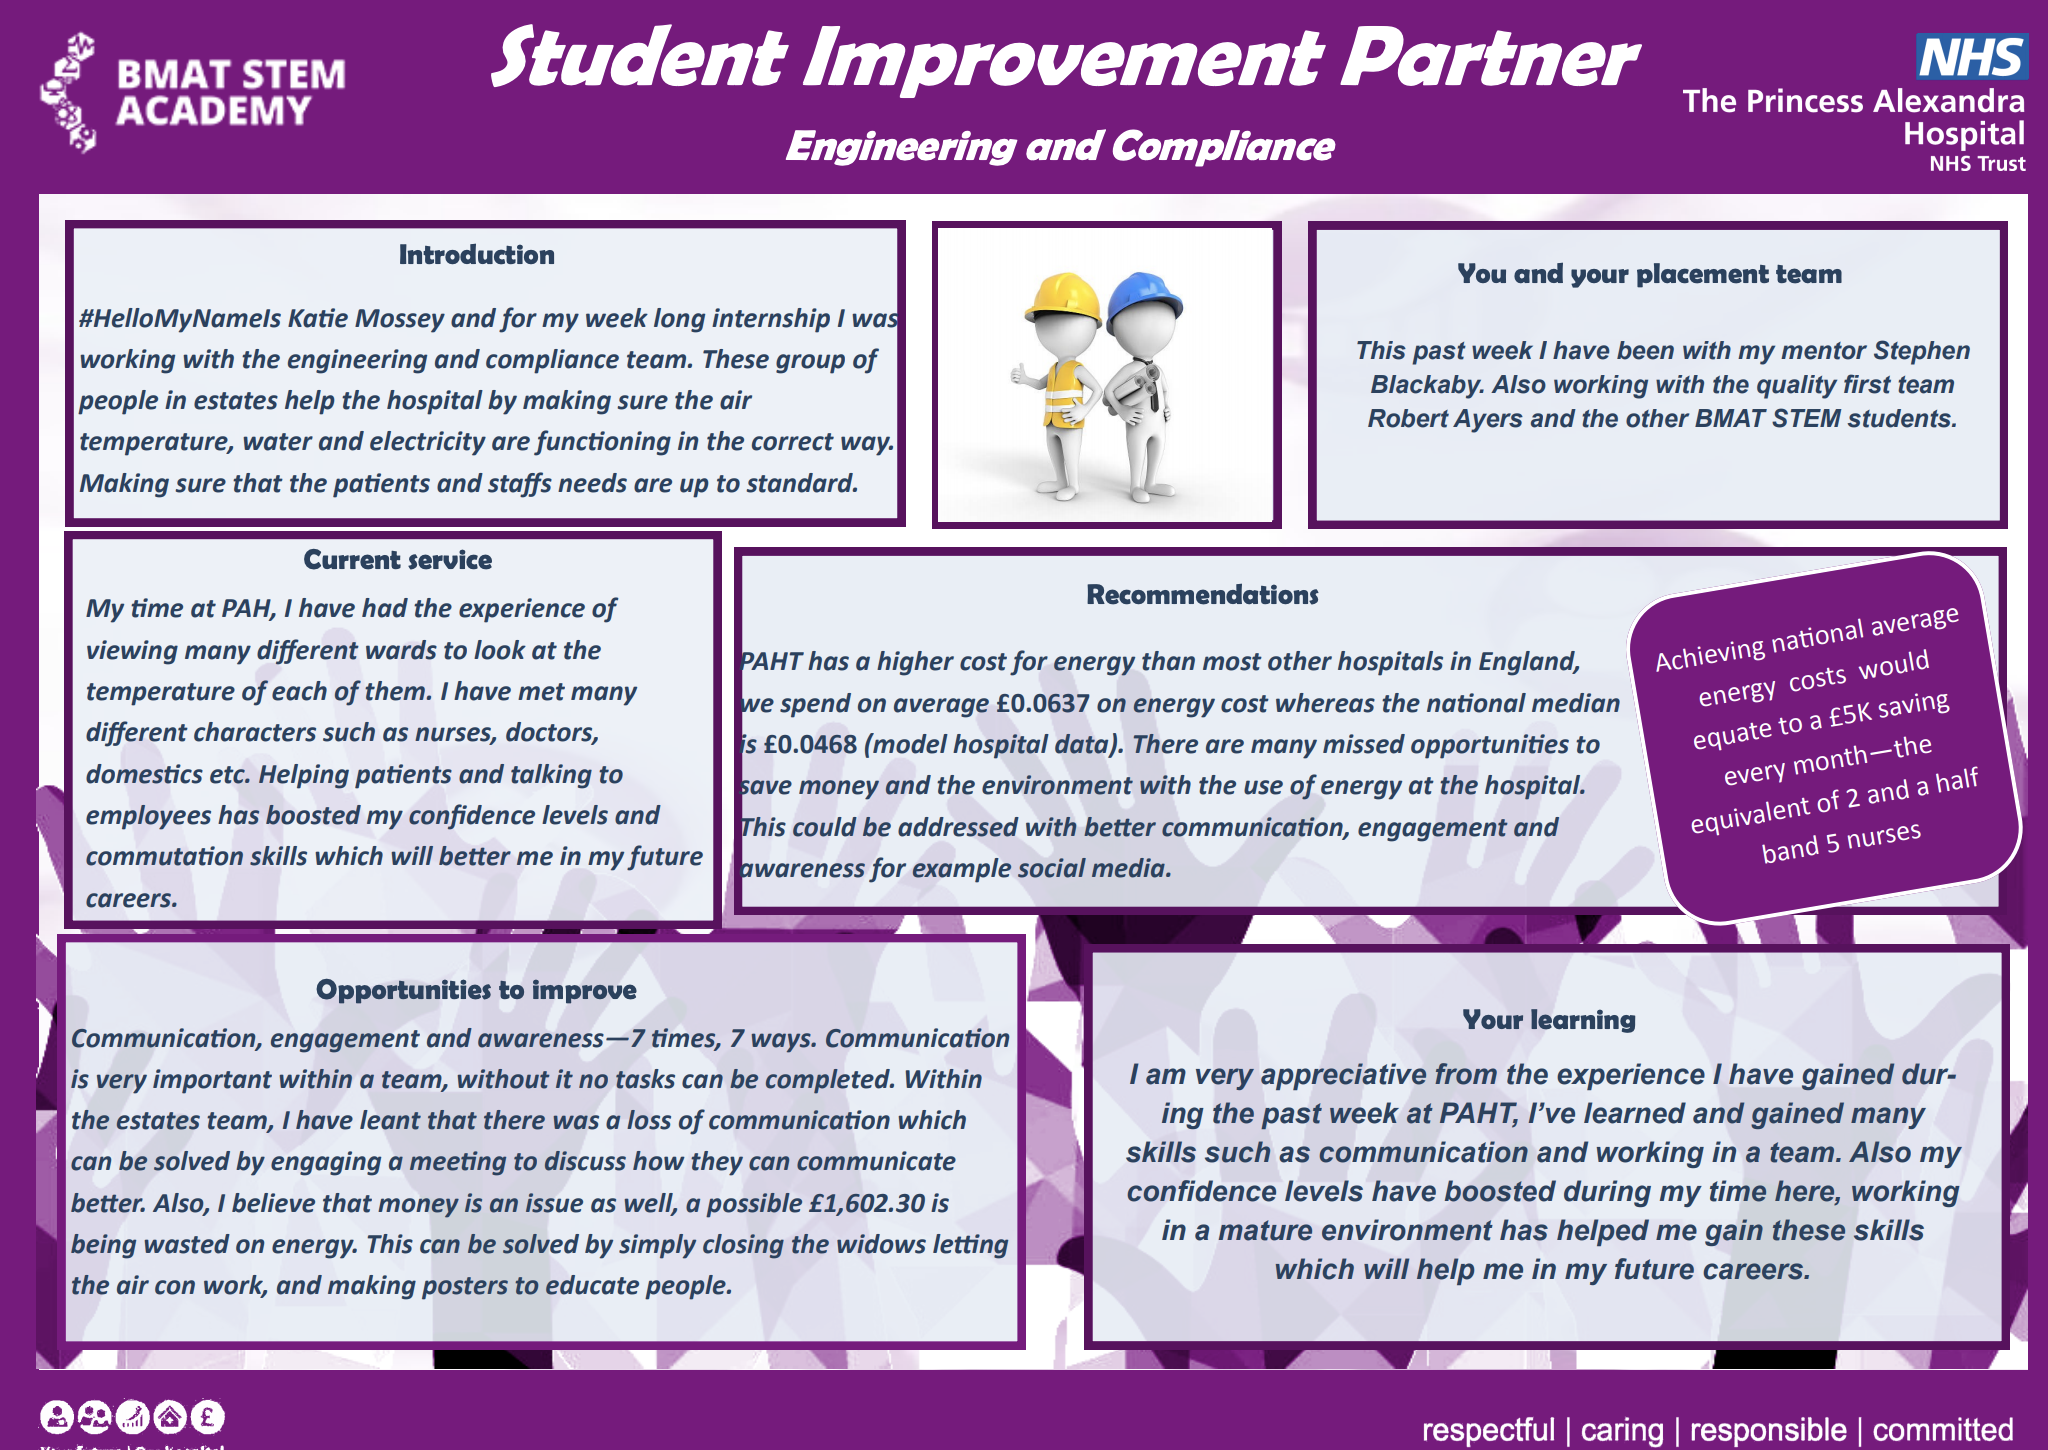 Student Improvement Partner - Engineering and Compliance - Katie Mossey - @QualityFirstPAH featured image